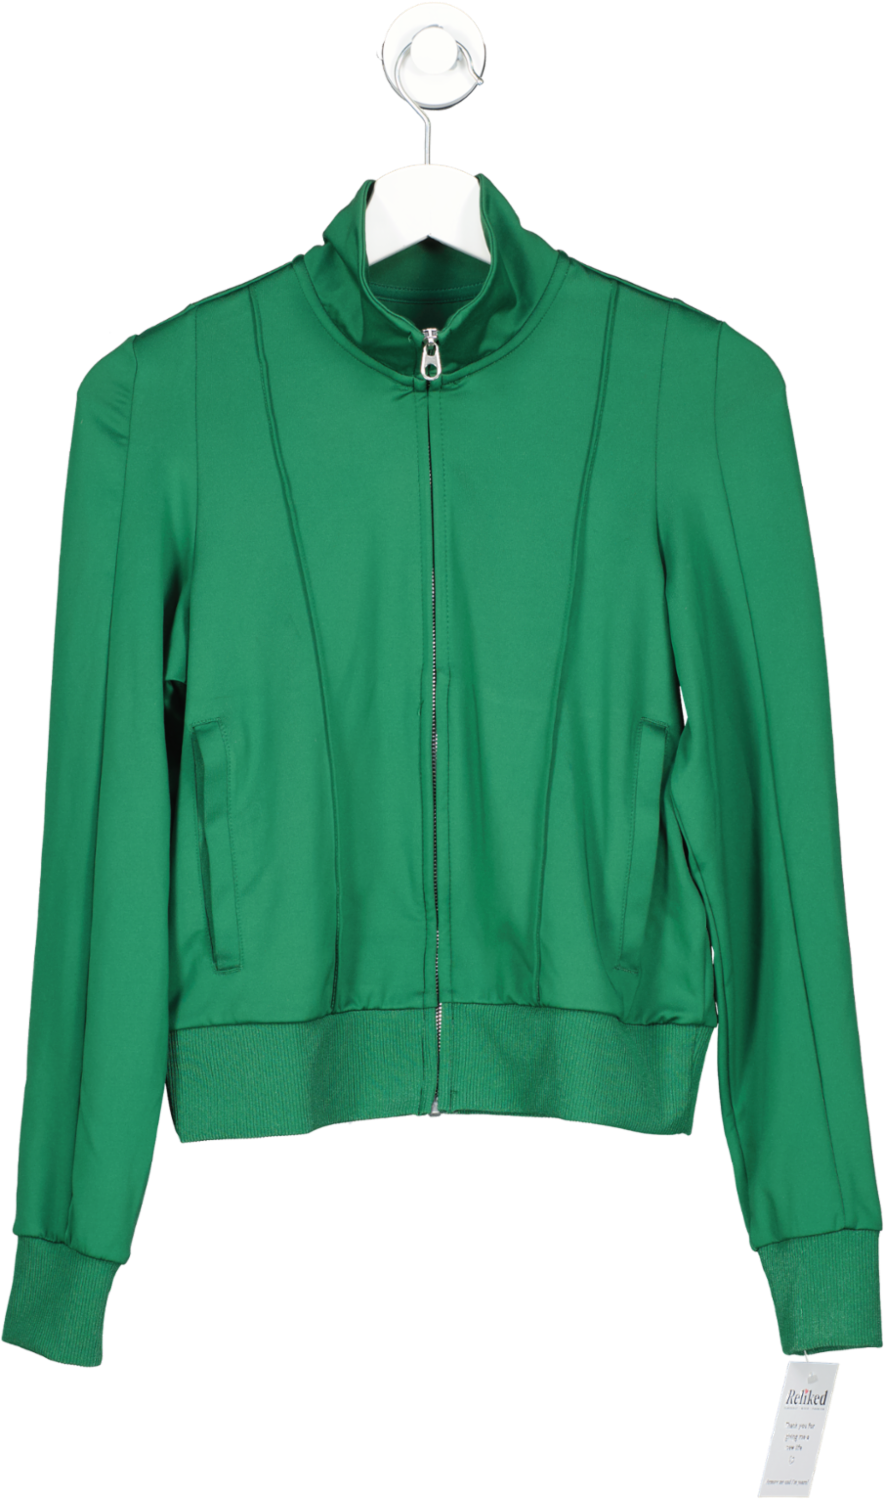 H&M Green Fast Drying Track Jacket UK XS